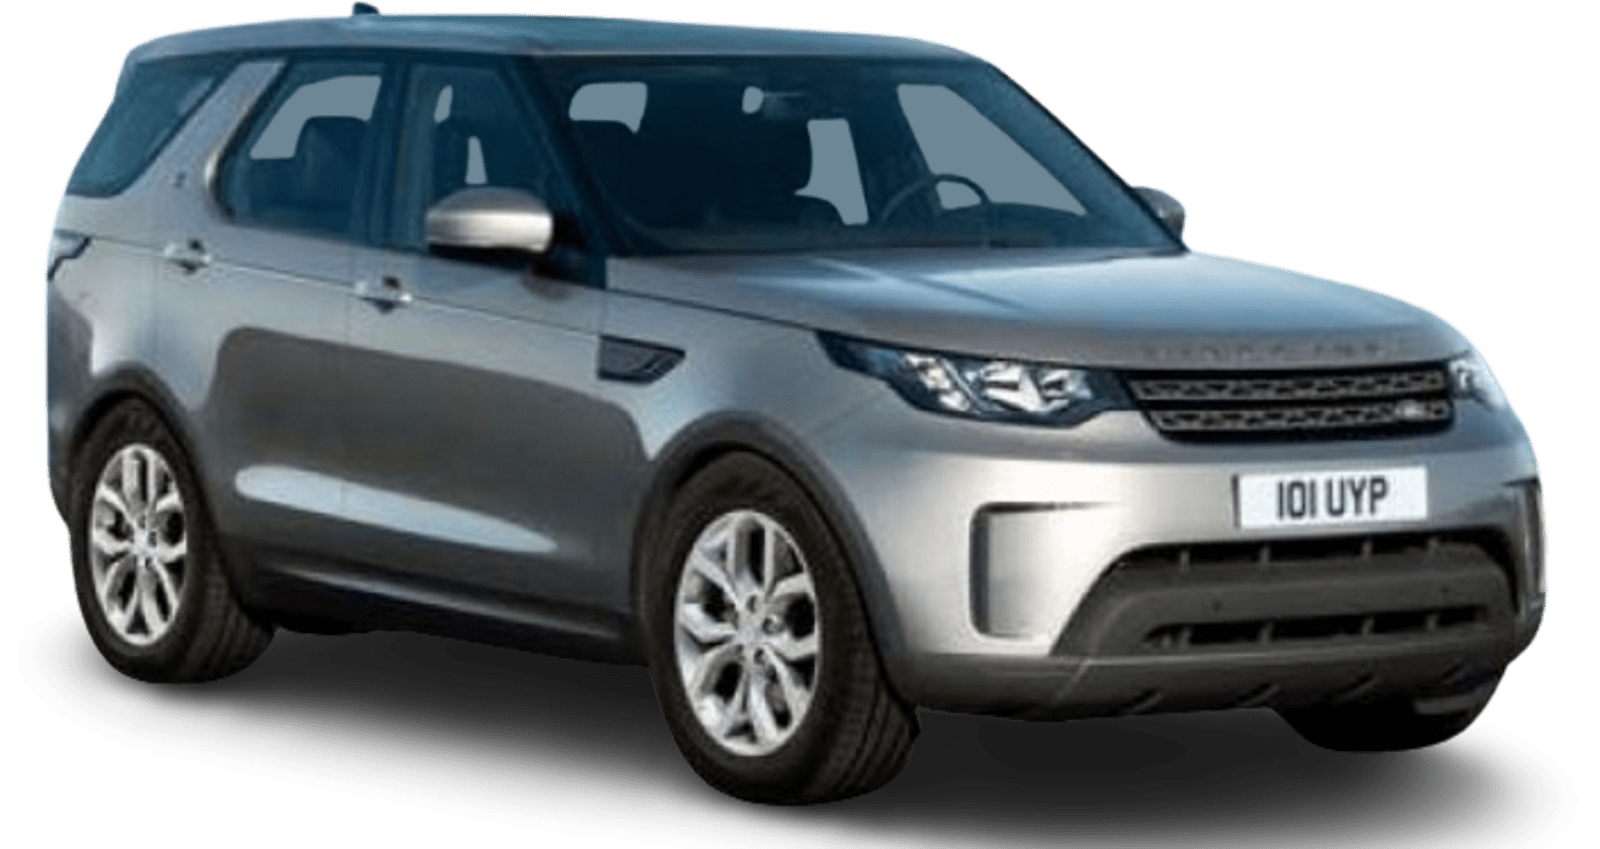 Land Rover Discovery cutout image